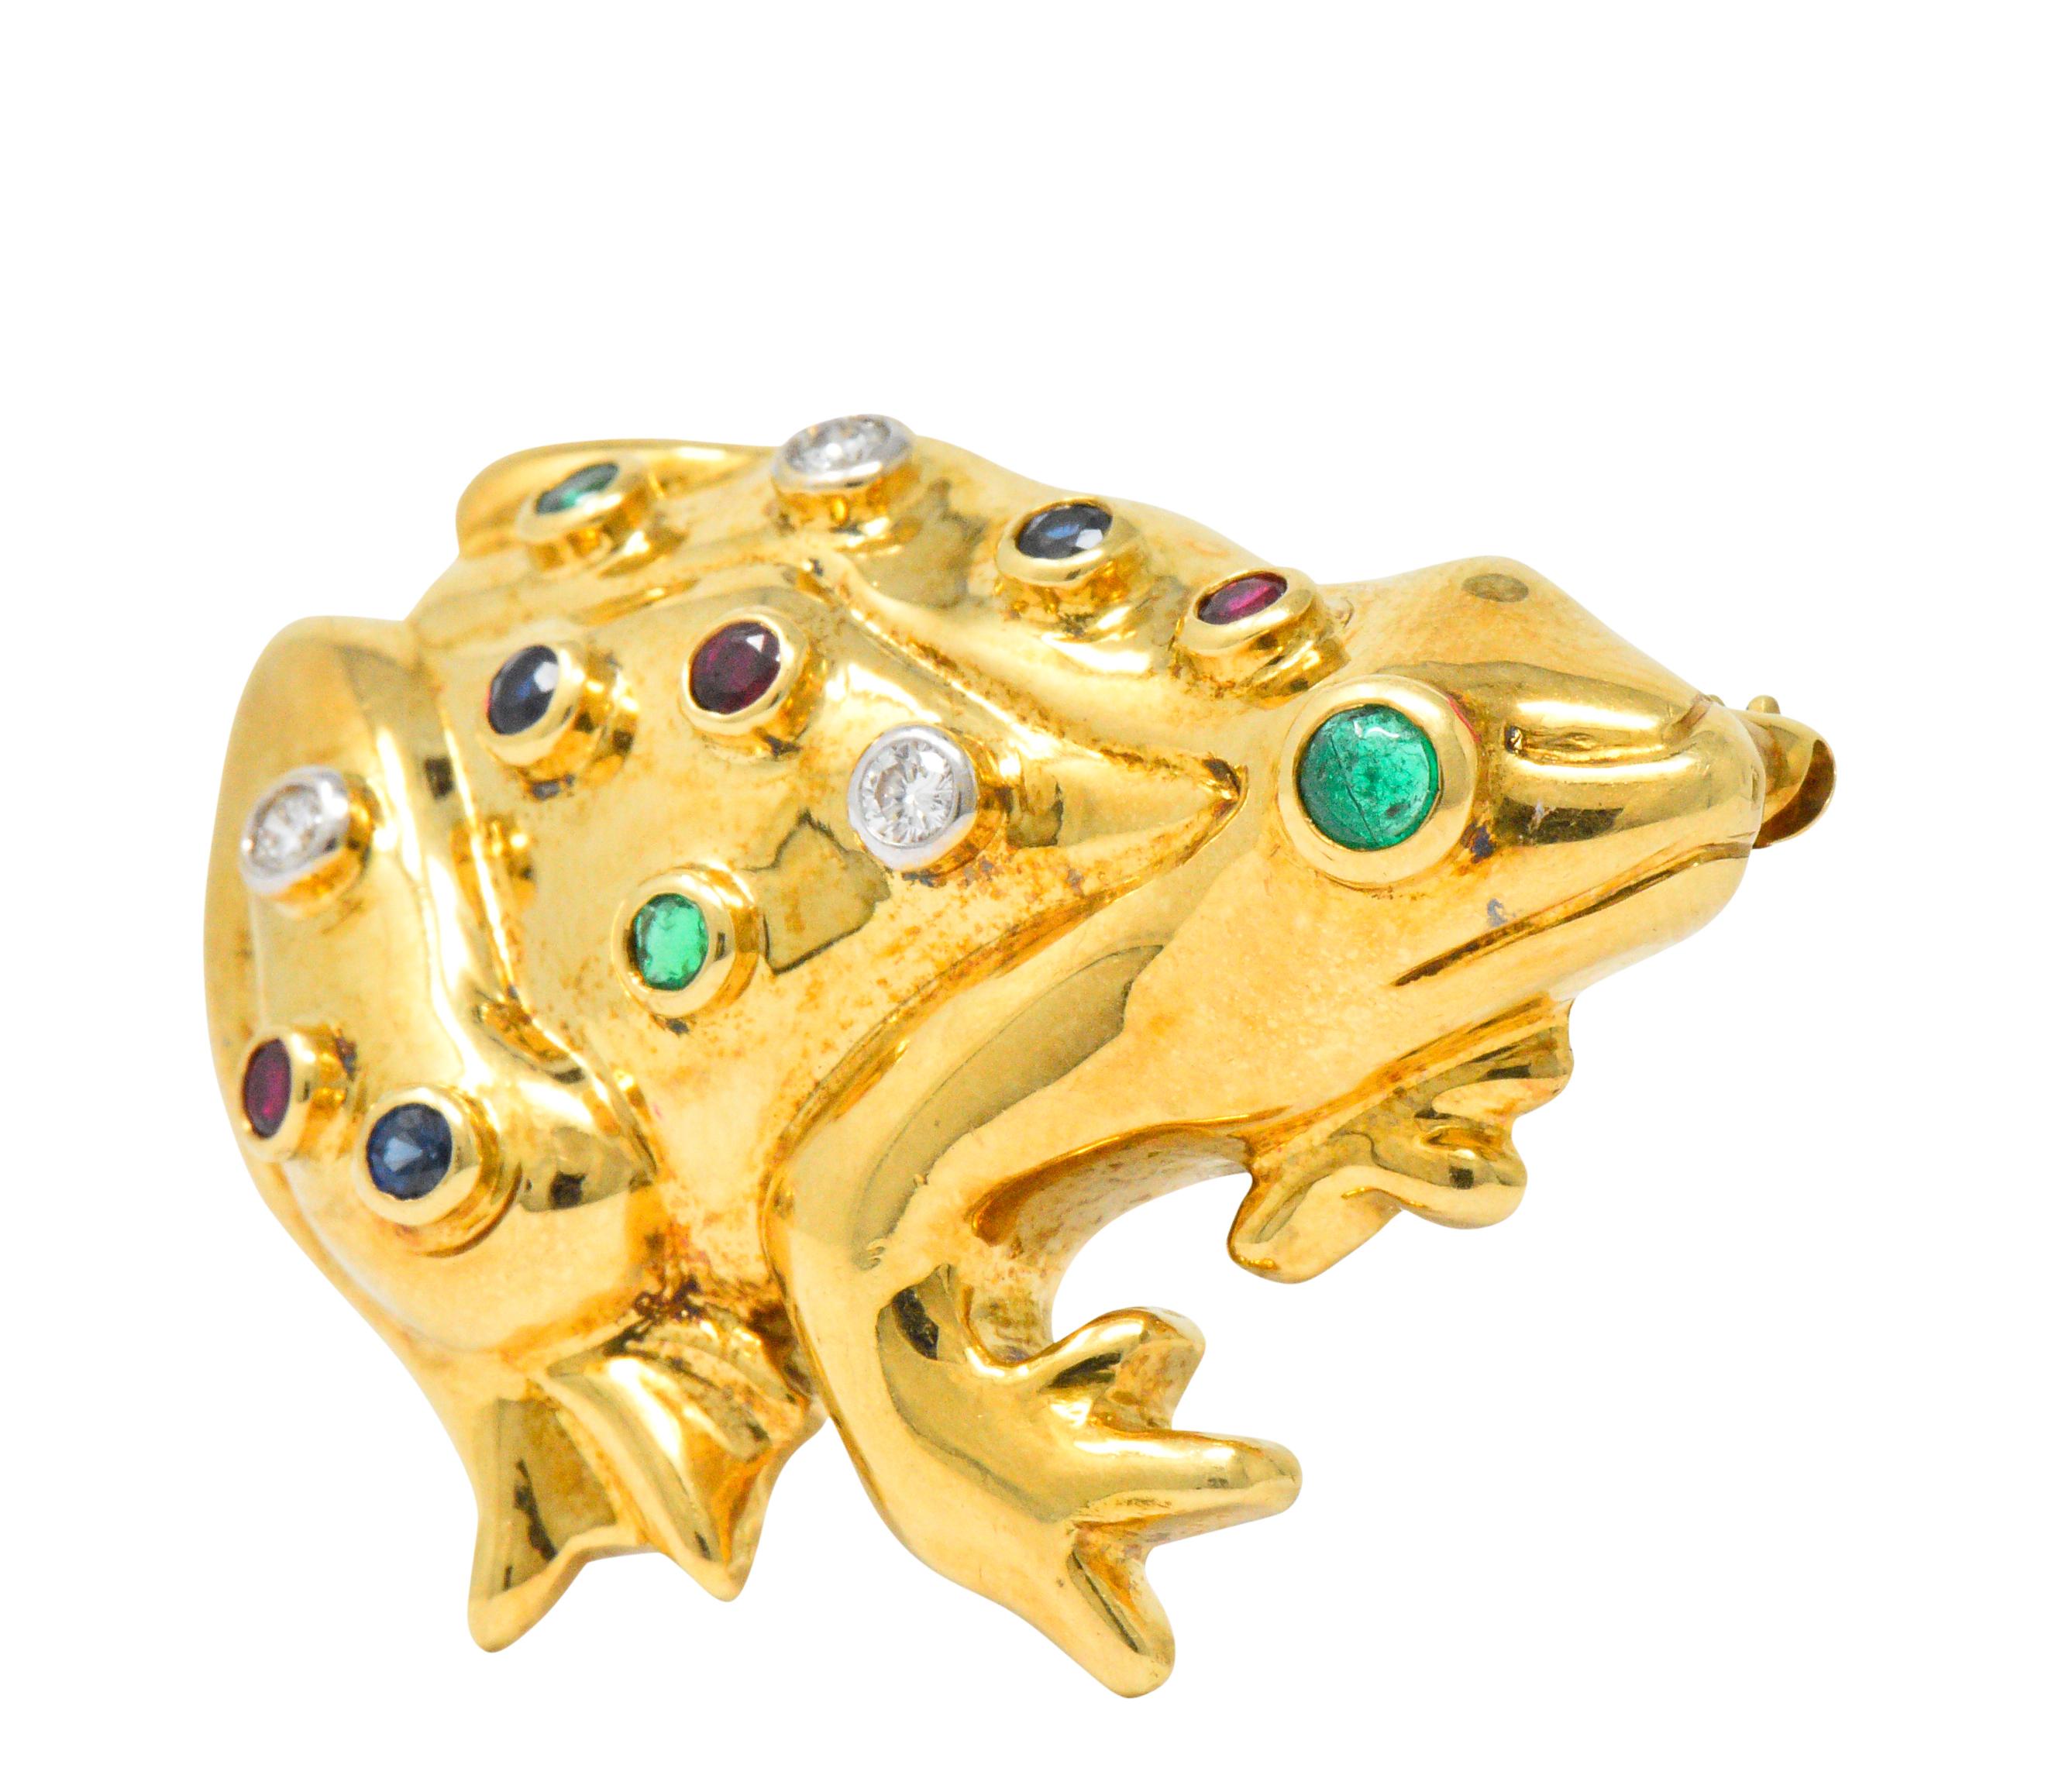 Featuring a high polished gold frog set with emeralds, rubies, sapphires and diamonds - all bezel set

Three round brilliant cut diamonds, G/H color, VS clarity

Three round cut rubies, deep bright red

Three round cut sapphires, deep bright